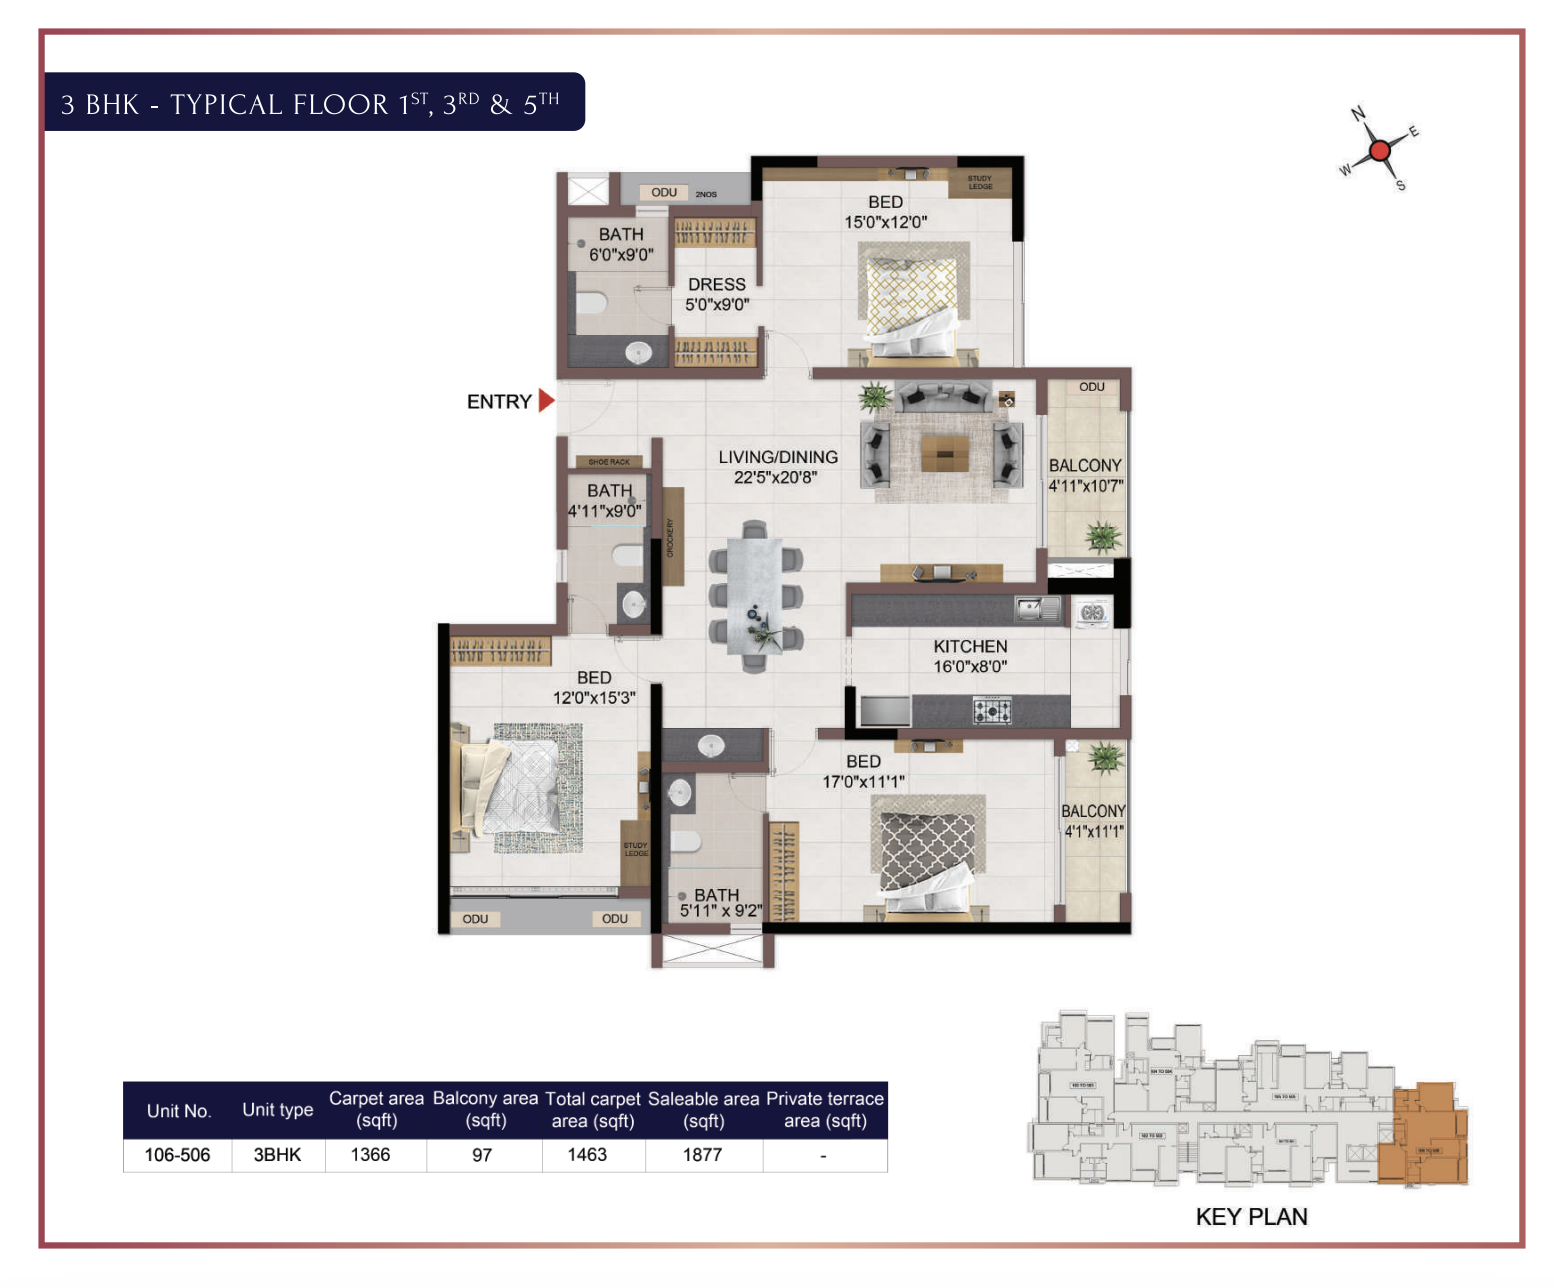 Casagrand Dior - 3BHK - Typical Floor Plan - 1st, 3rd and 5th